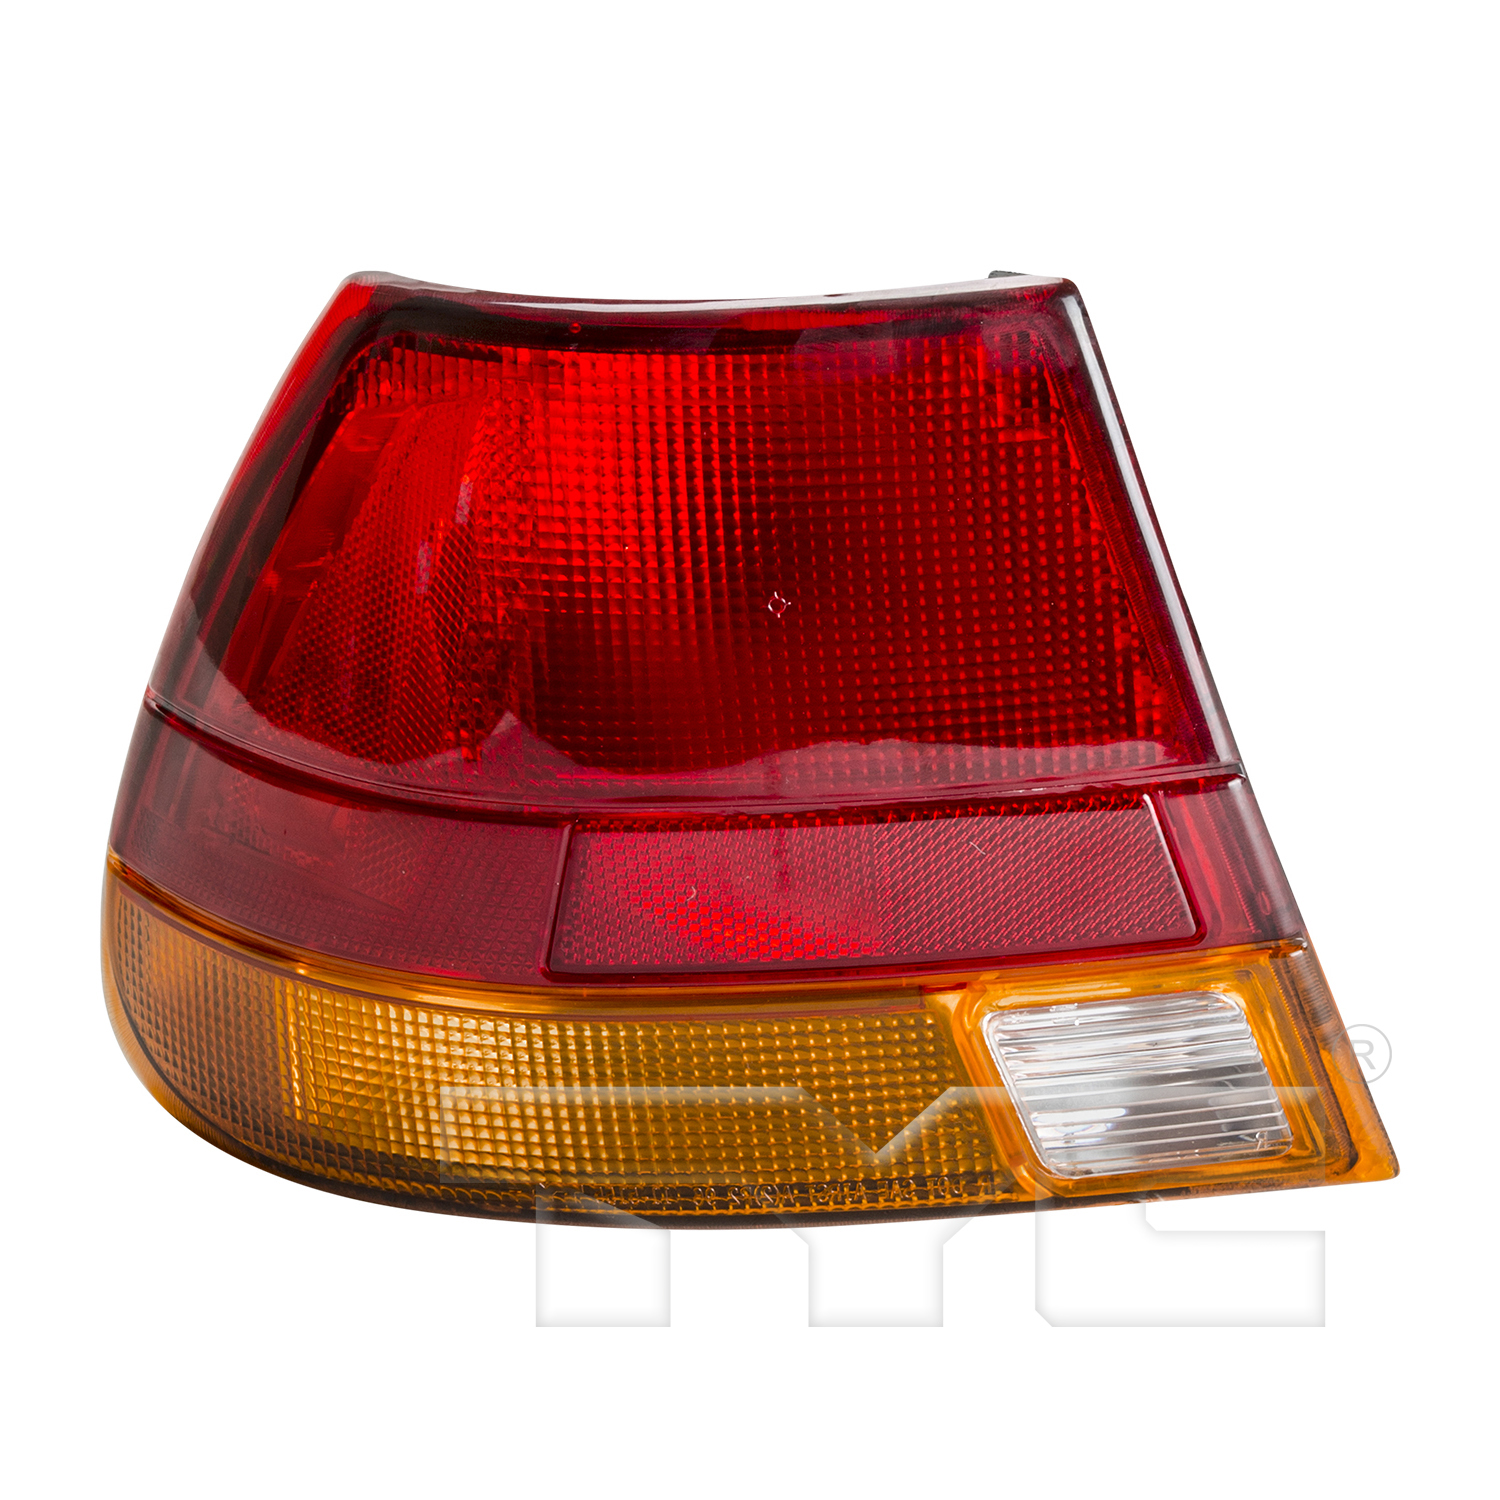 Aftermarket TAILLIGHTS for SATURN - SL2, SL2,96-97,LT Taillamp lens/housing